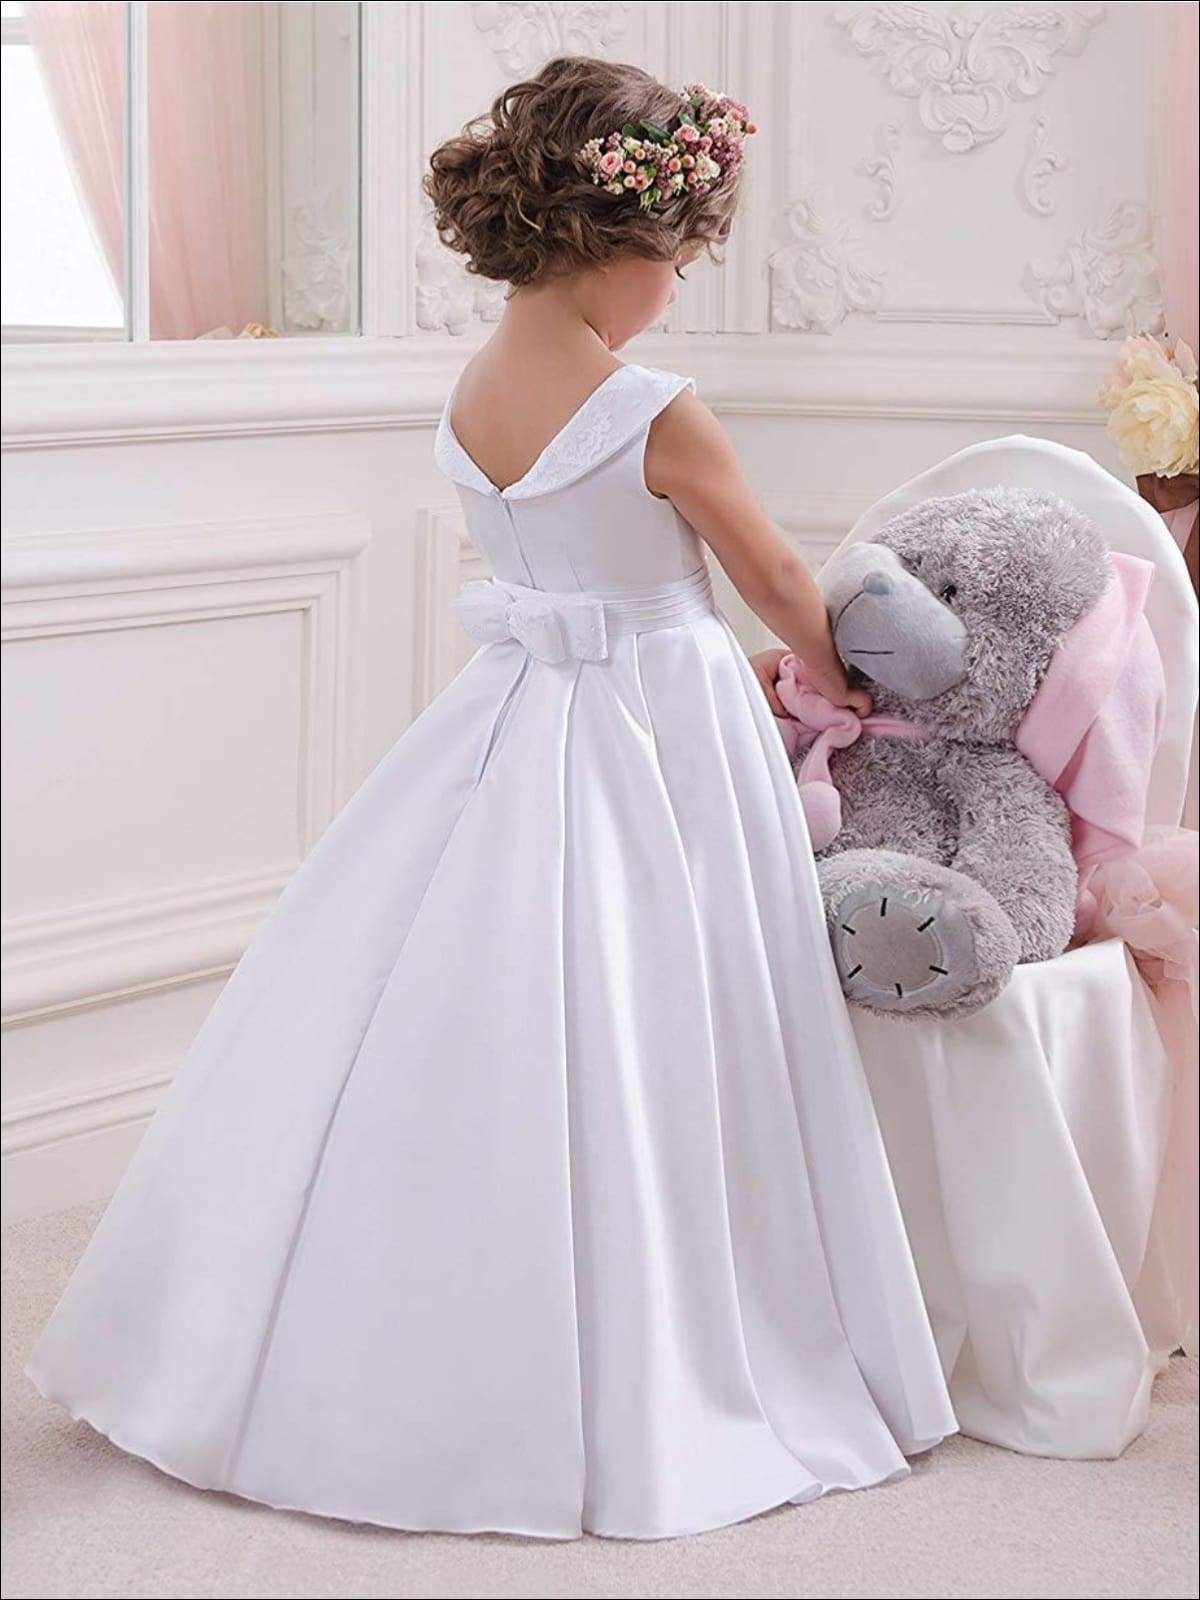 Girls Vintage Style Embellished Floor Length Gown with Crystal Applique - Girls Gown